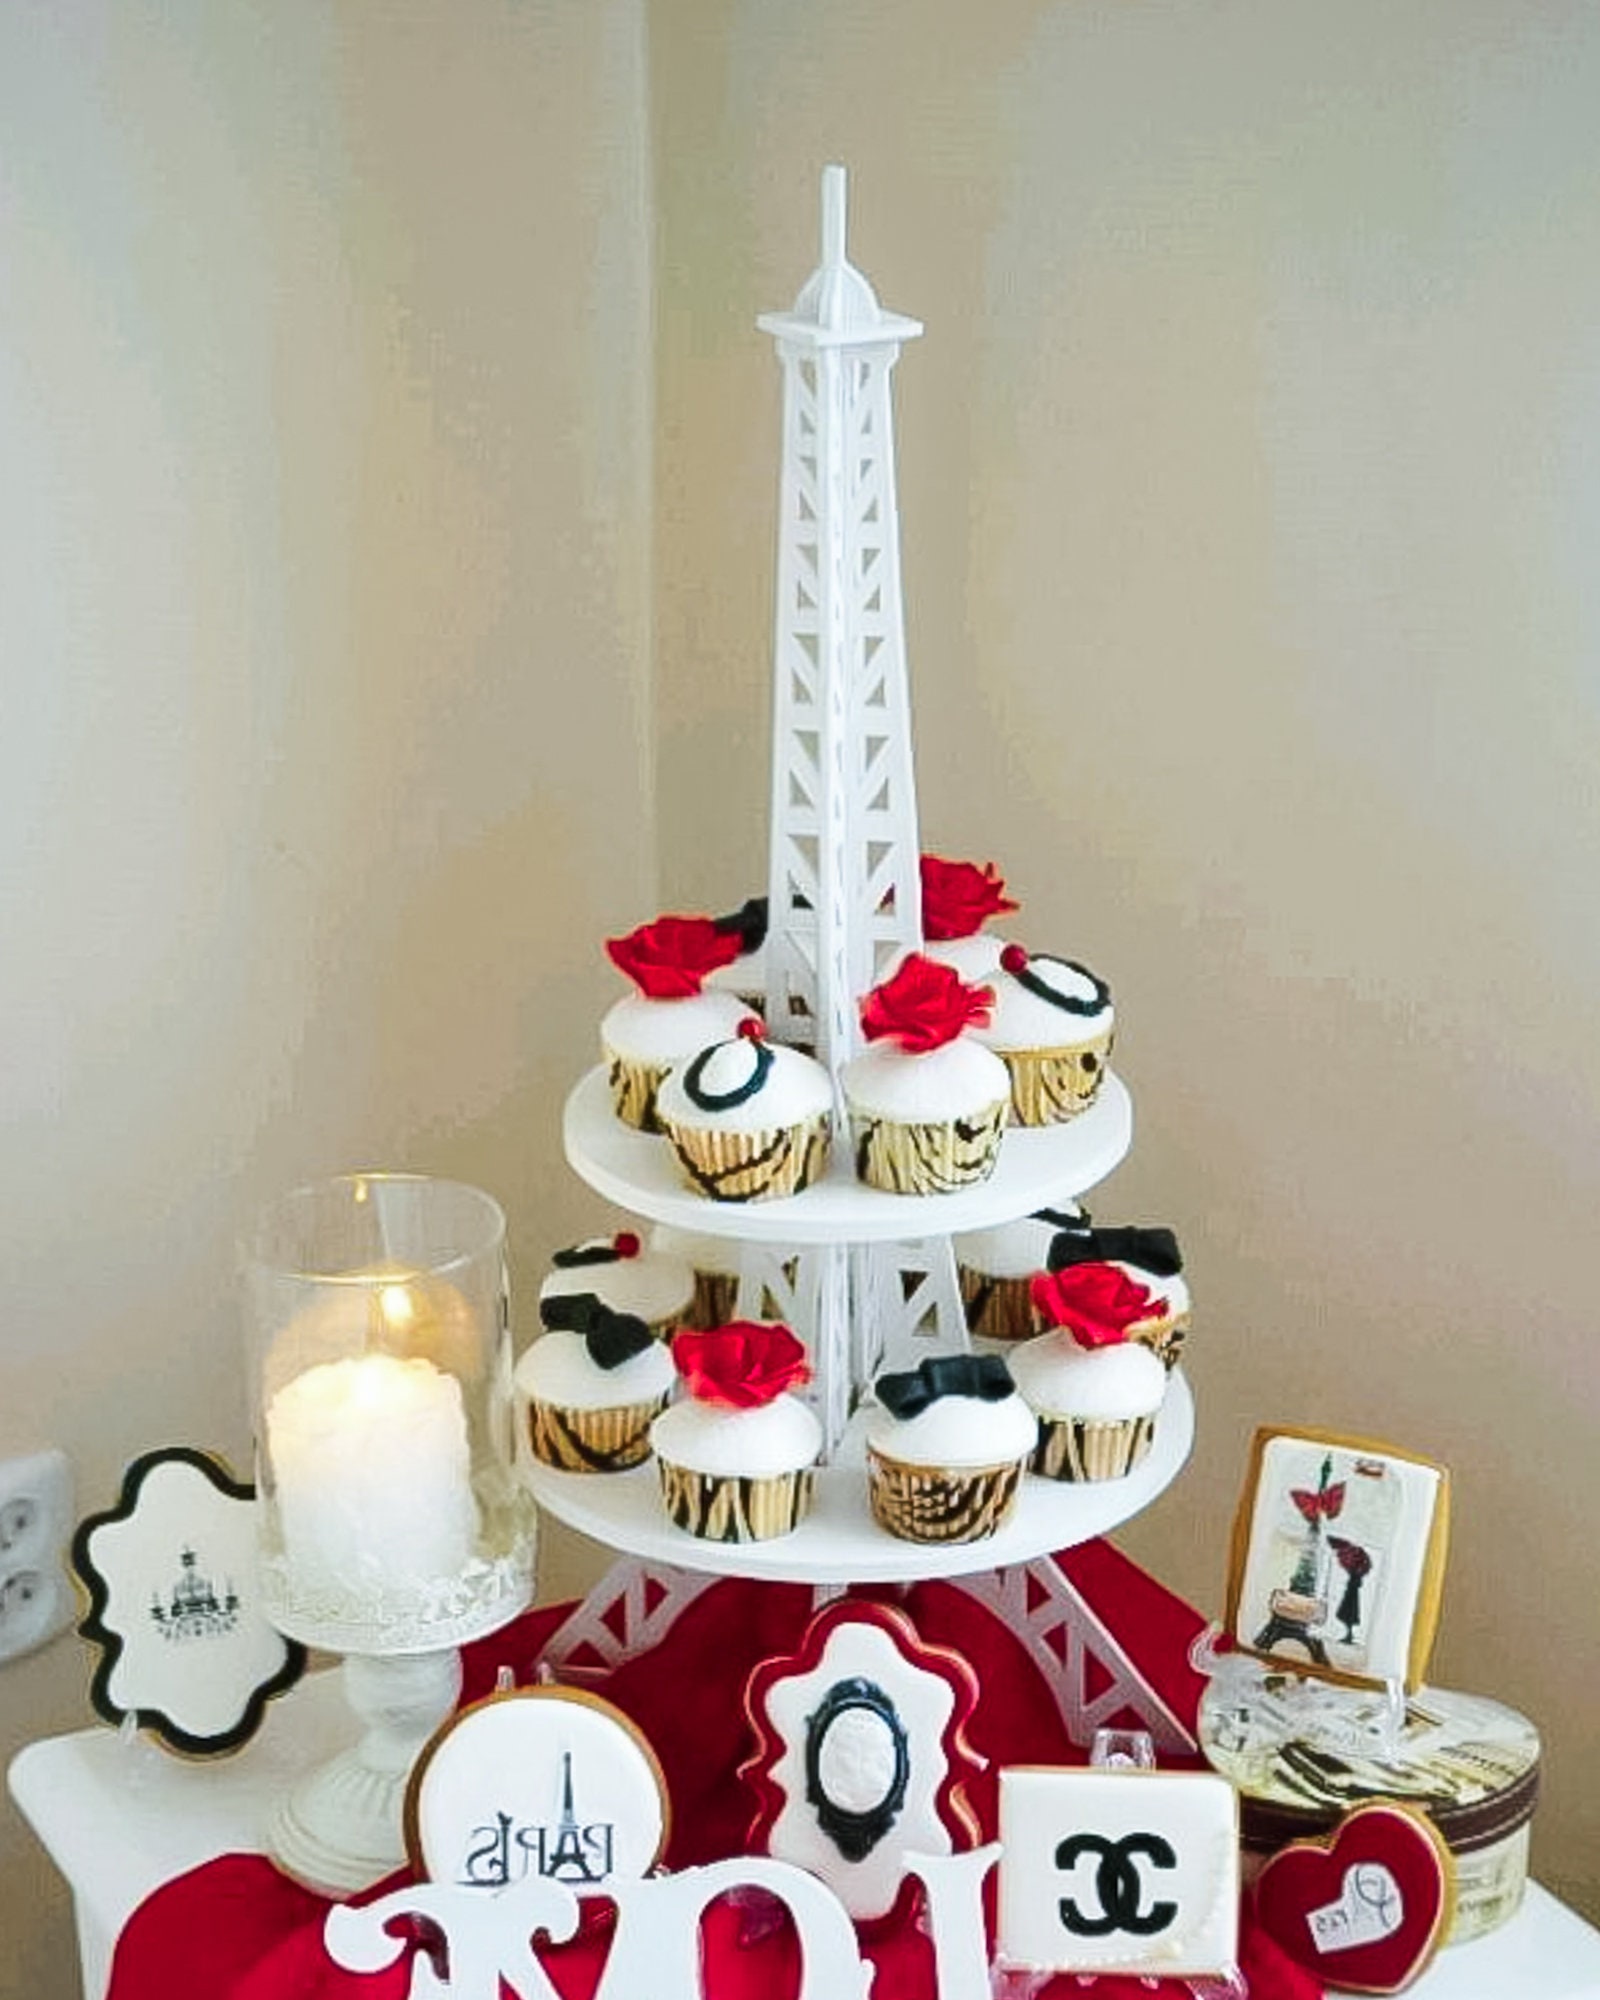 Buy Custom Acrylic Eiffel Tower Cake Stand, made to order from Artifacture  | CustomMade.com